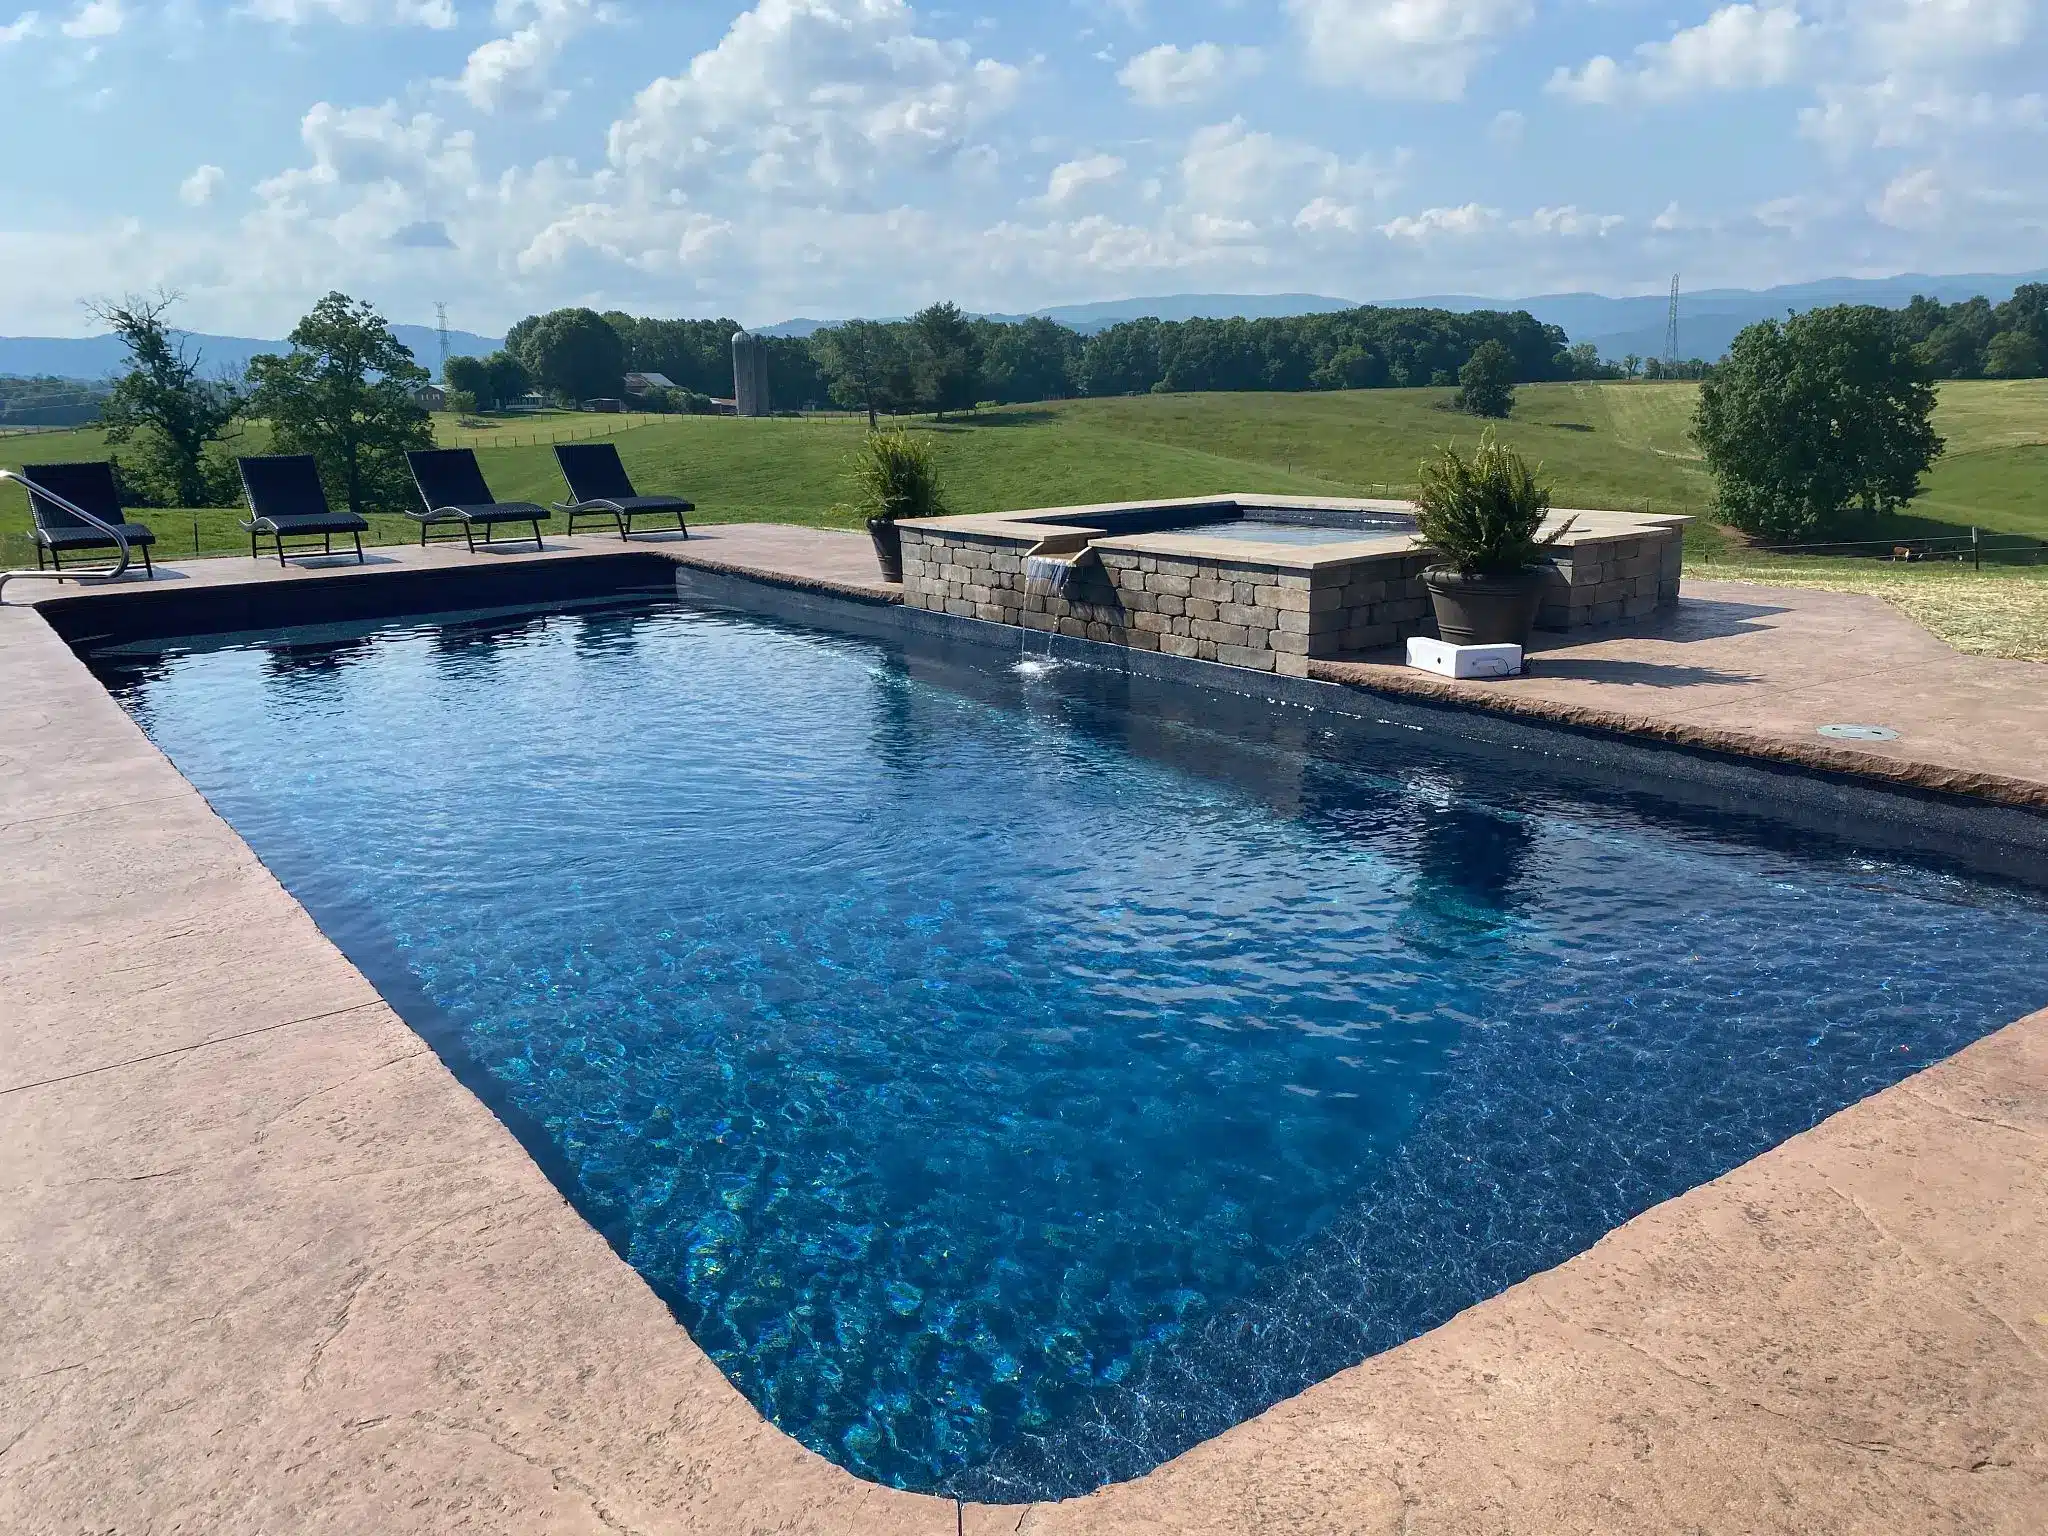 Find out the size, shape, and depth of the pool.